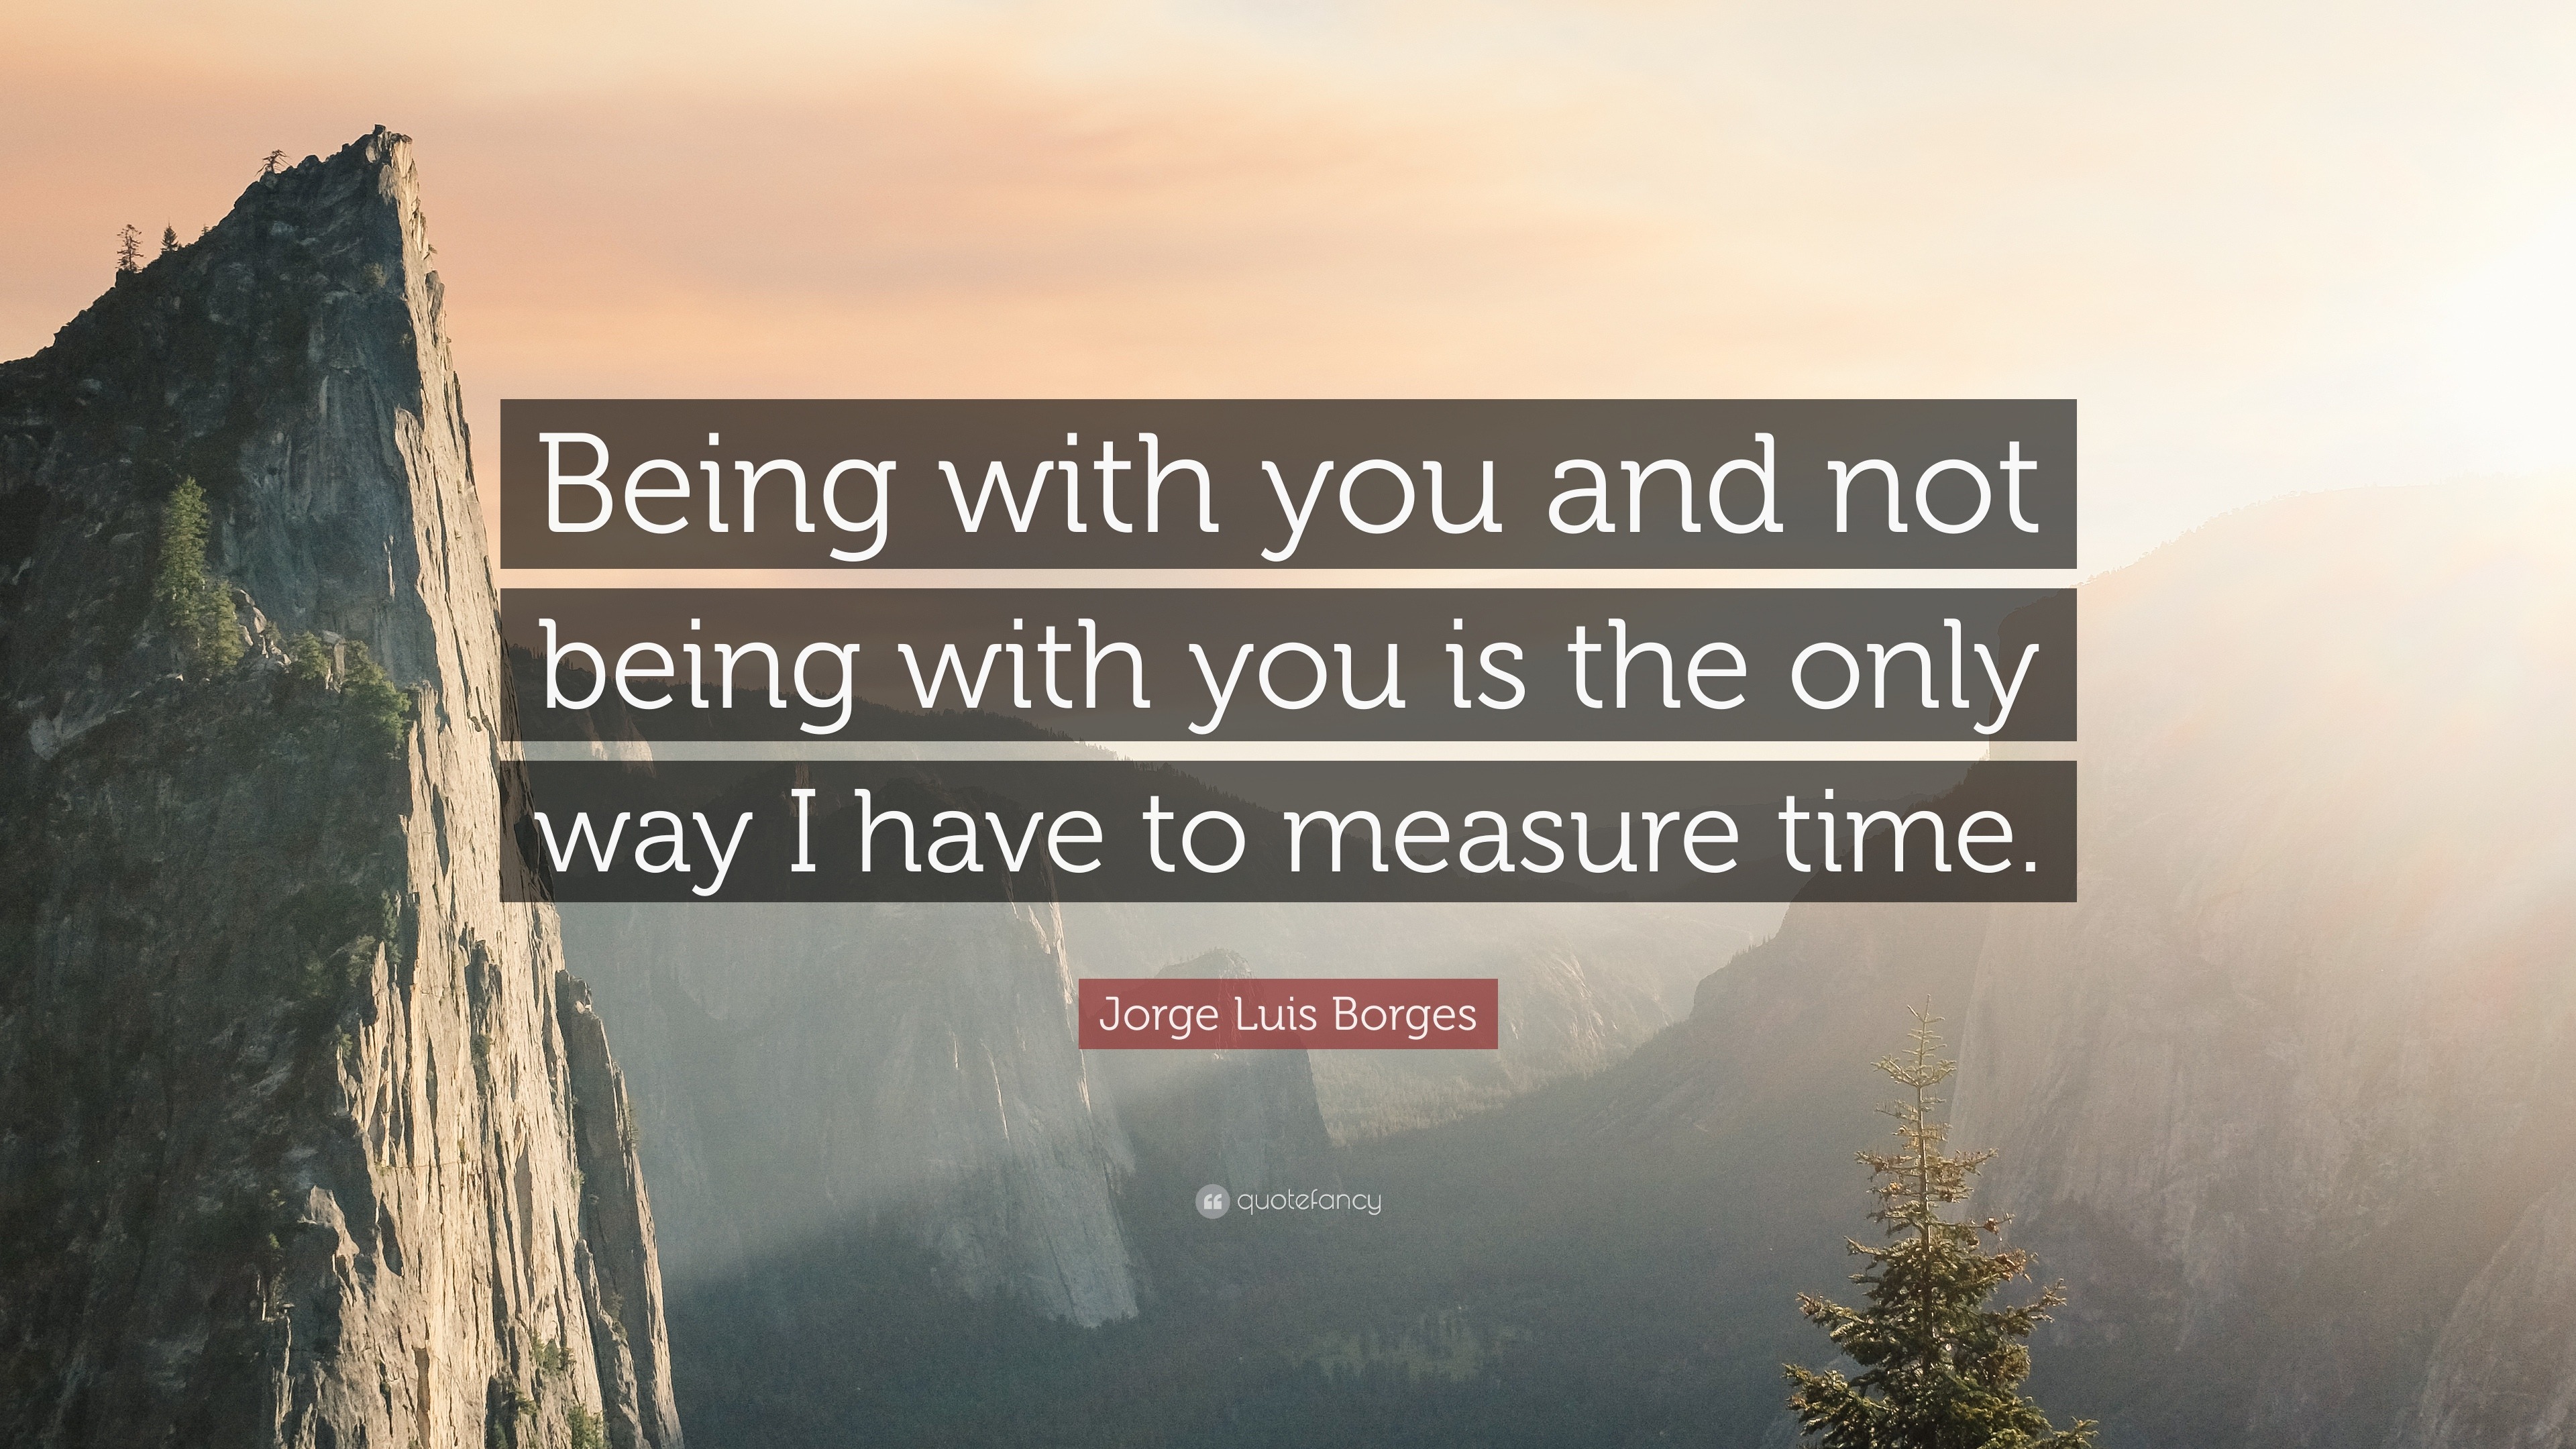 Jorge Luis Borges Quote: “Being with you and not being with you is the ...